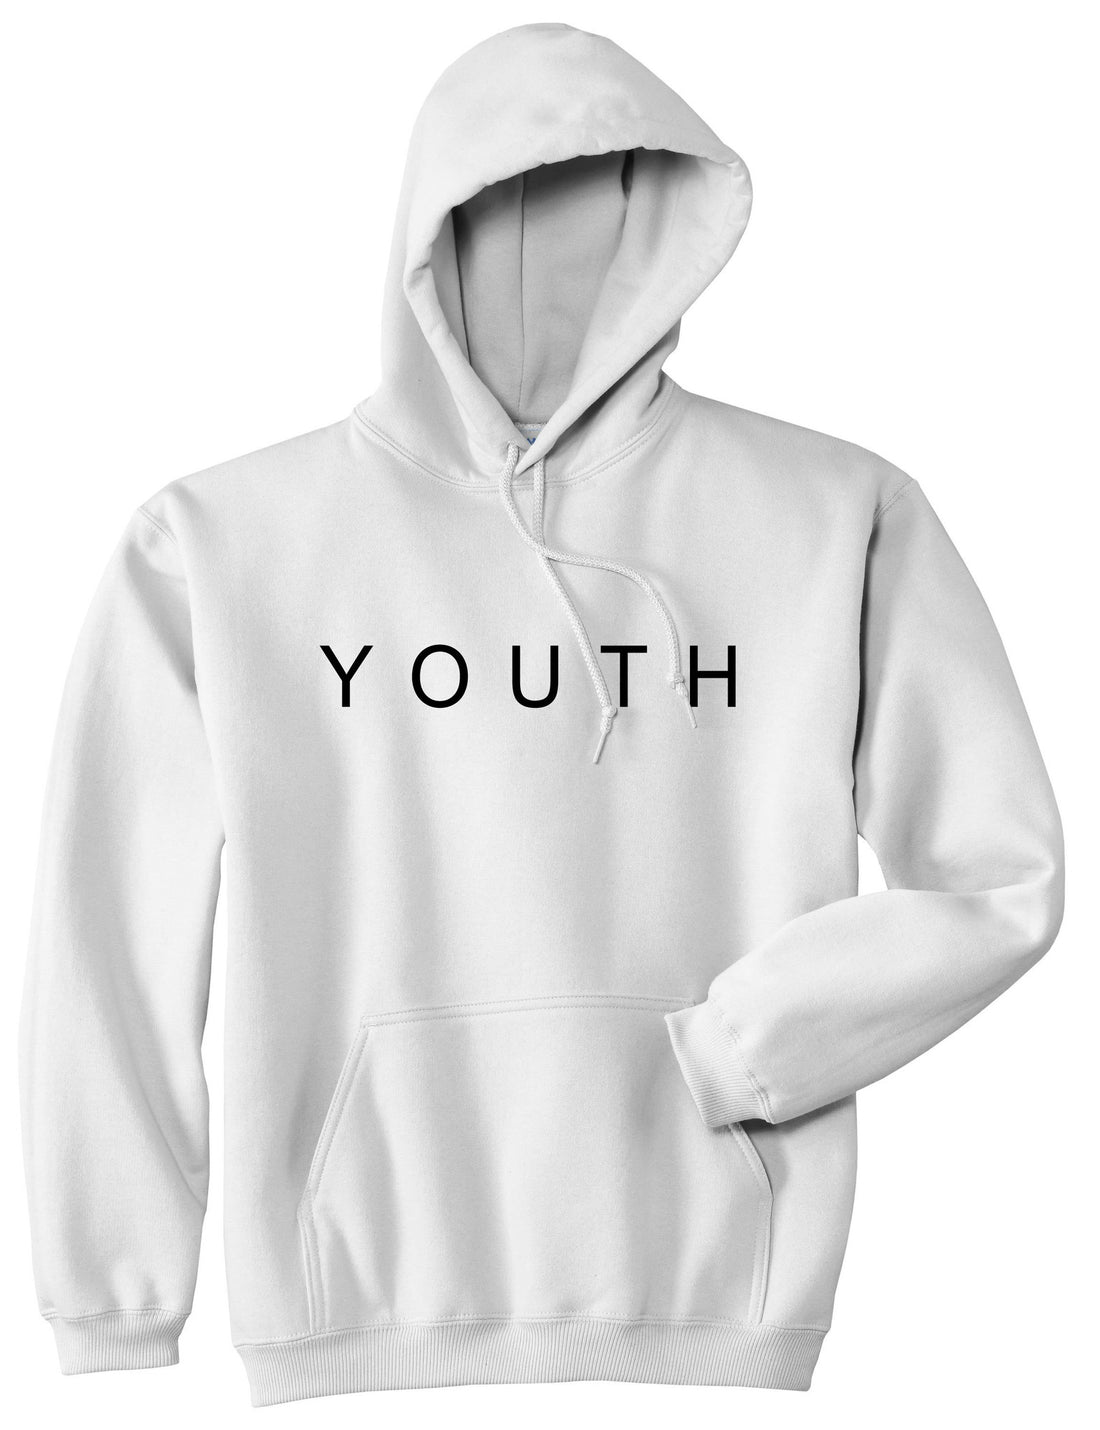 YOUTH Pullover Hoodie